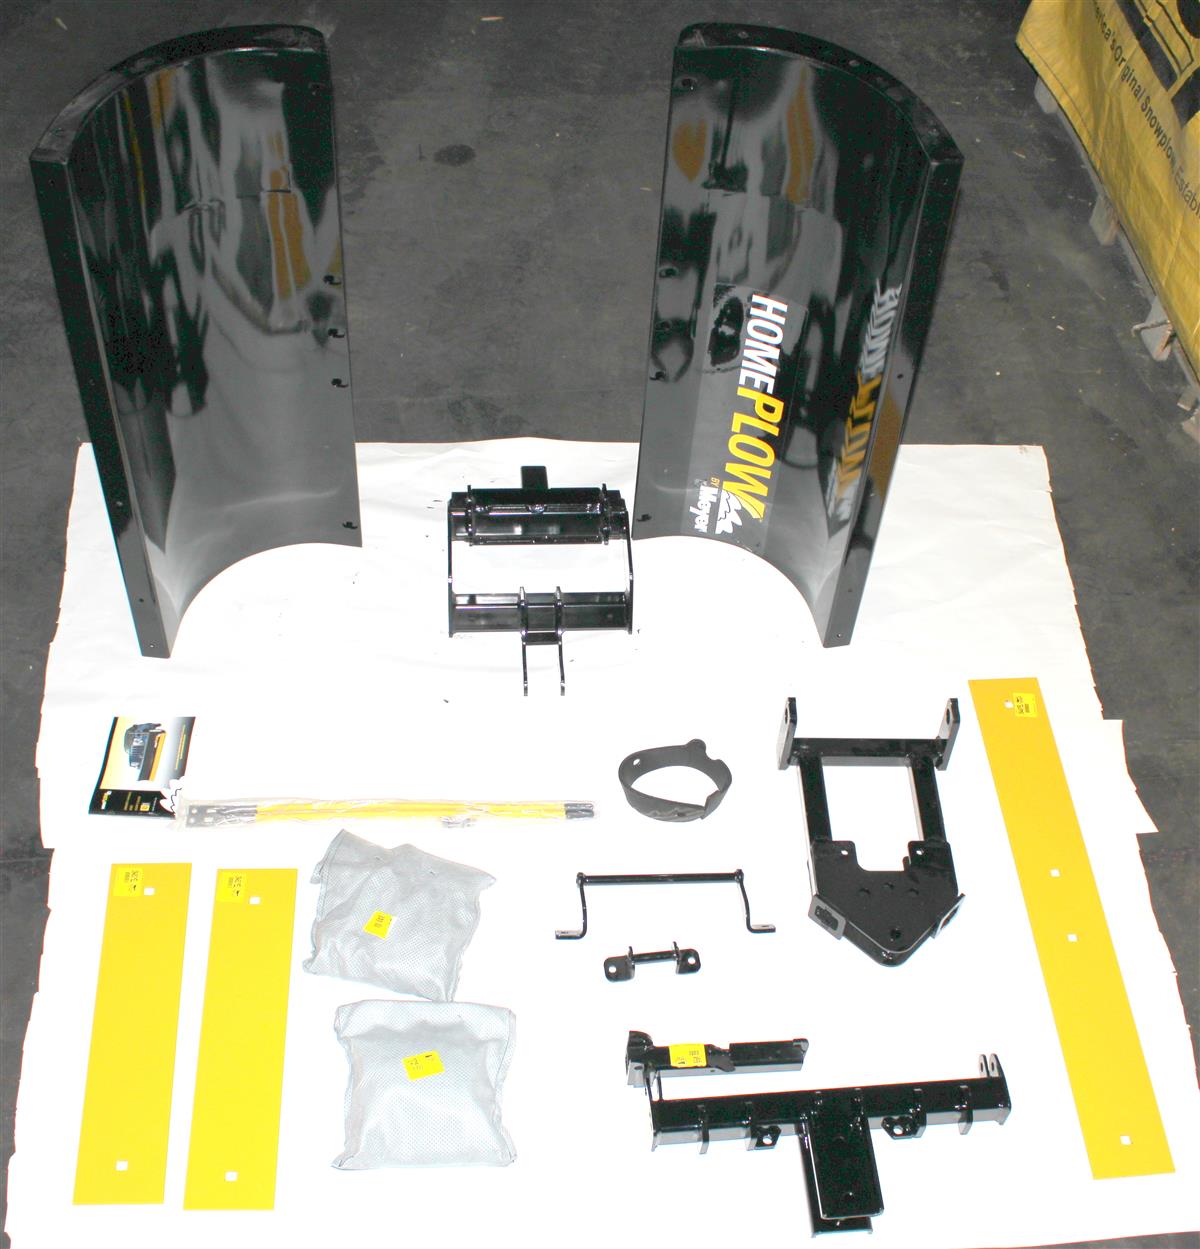 SNOW-068 | SNOW-068 Meyer Home Plow HP 6.8 2PC Manual Lift Engine Package Kit with Blades Meyer Sn (8).JPG